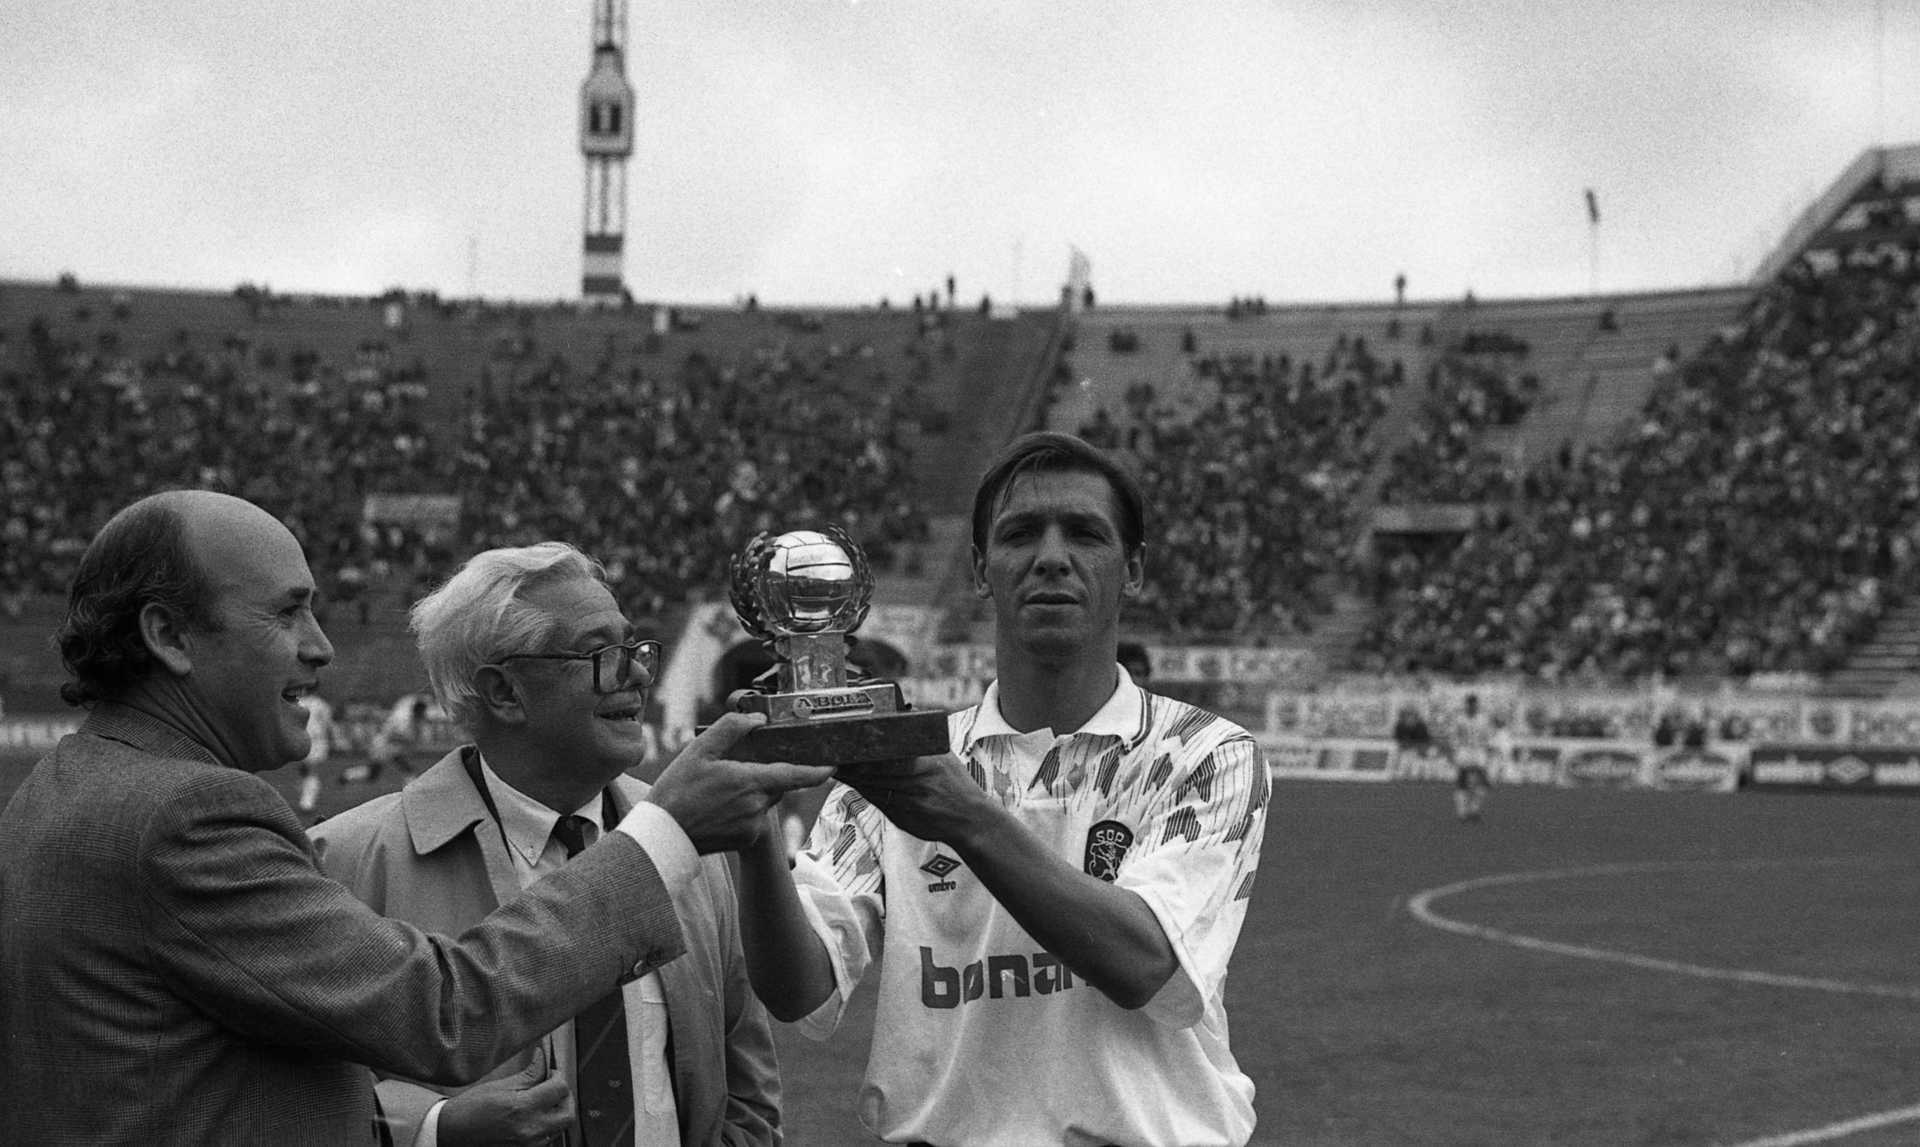 Fernando Gomez was awarded the Ballon d'Or in 1990, while he was playing for Sporting